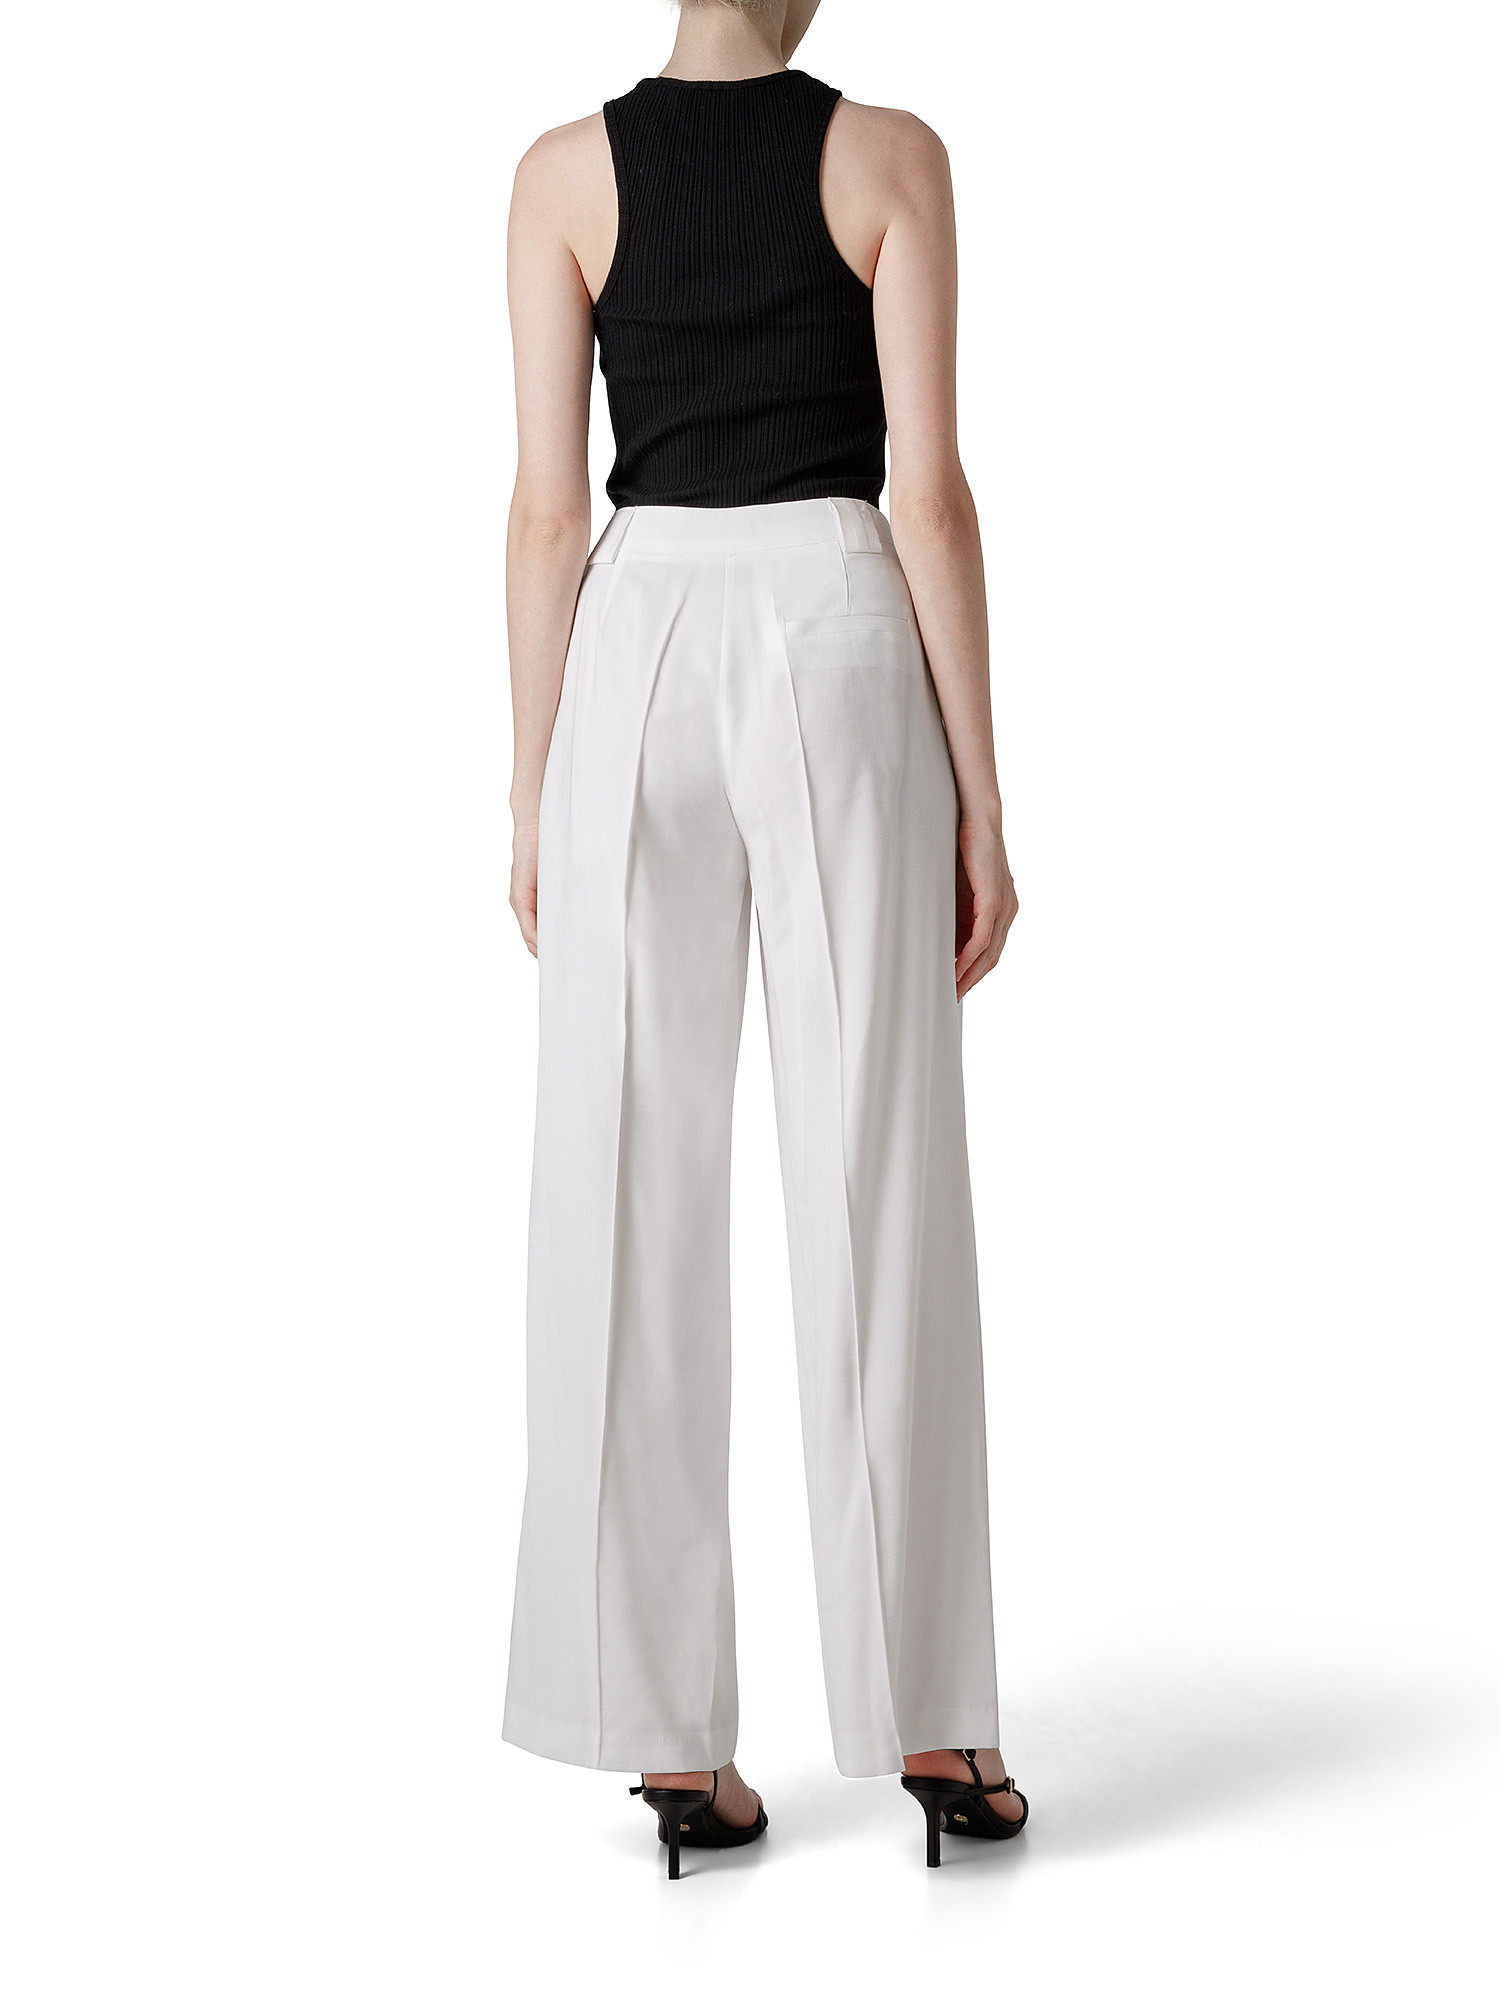 Trousers, White, large image number 3